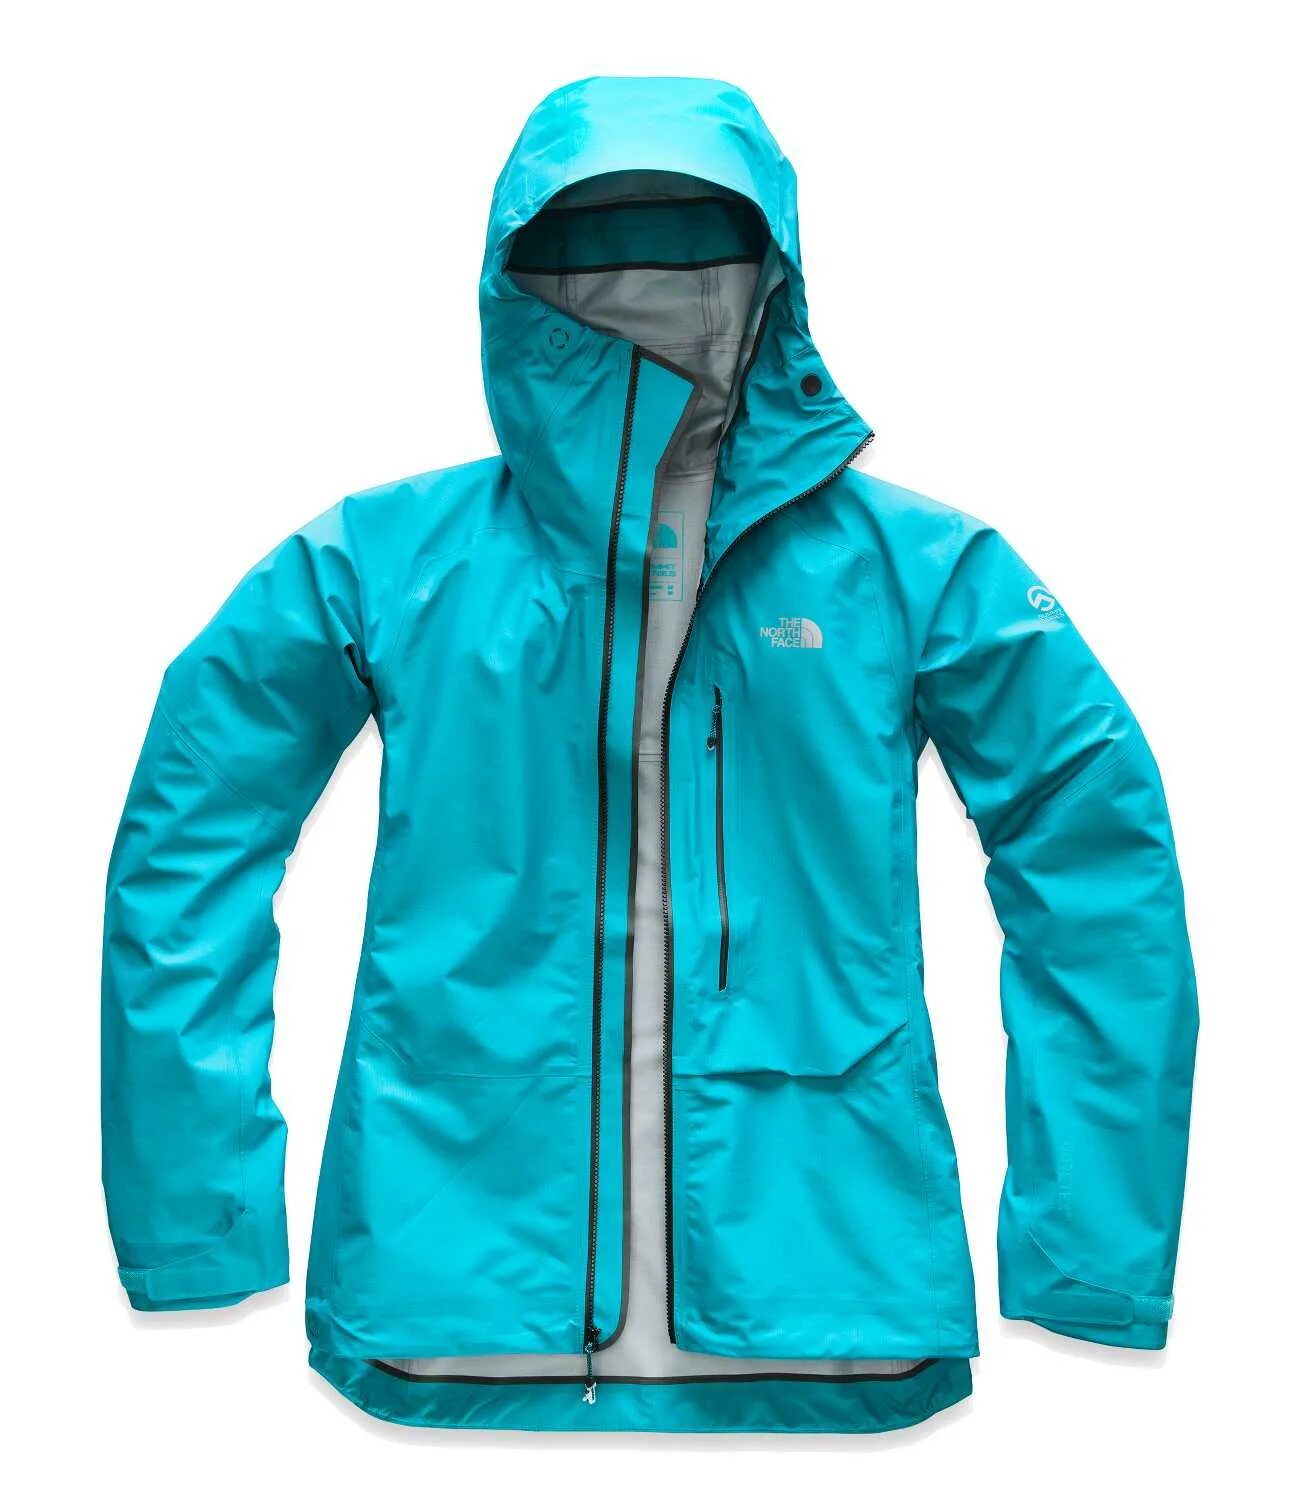 The north face summit series. The North face Gore-Tex куртка. The North face Summit Series куртки. The North face Summit Series Gore-Tex. The North face куртка гортекс.